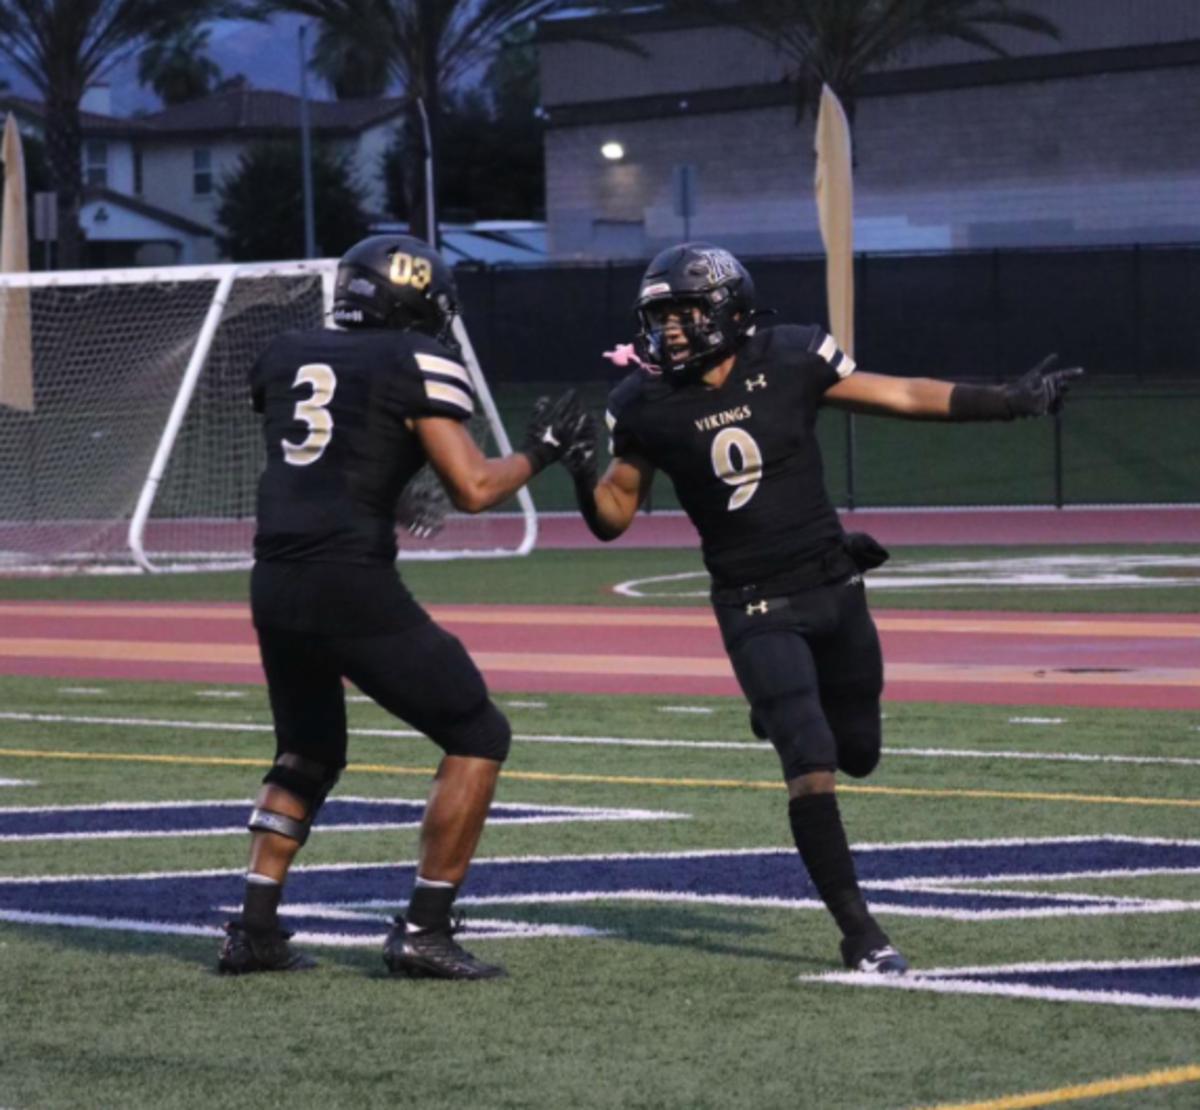 Senior Angel Barraza (#9) leads Northview with 13 rushing touchdowns, 52 tackles (tied), 8 TFLs, and 3 sacks (tied)